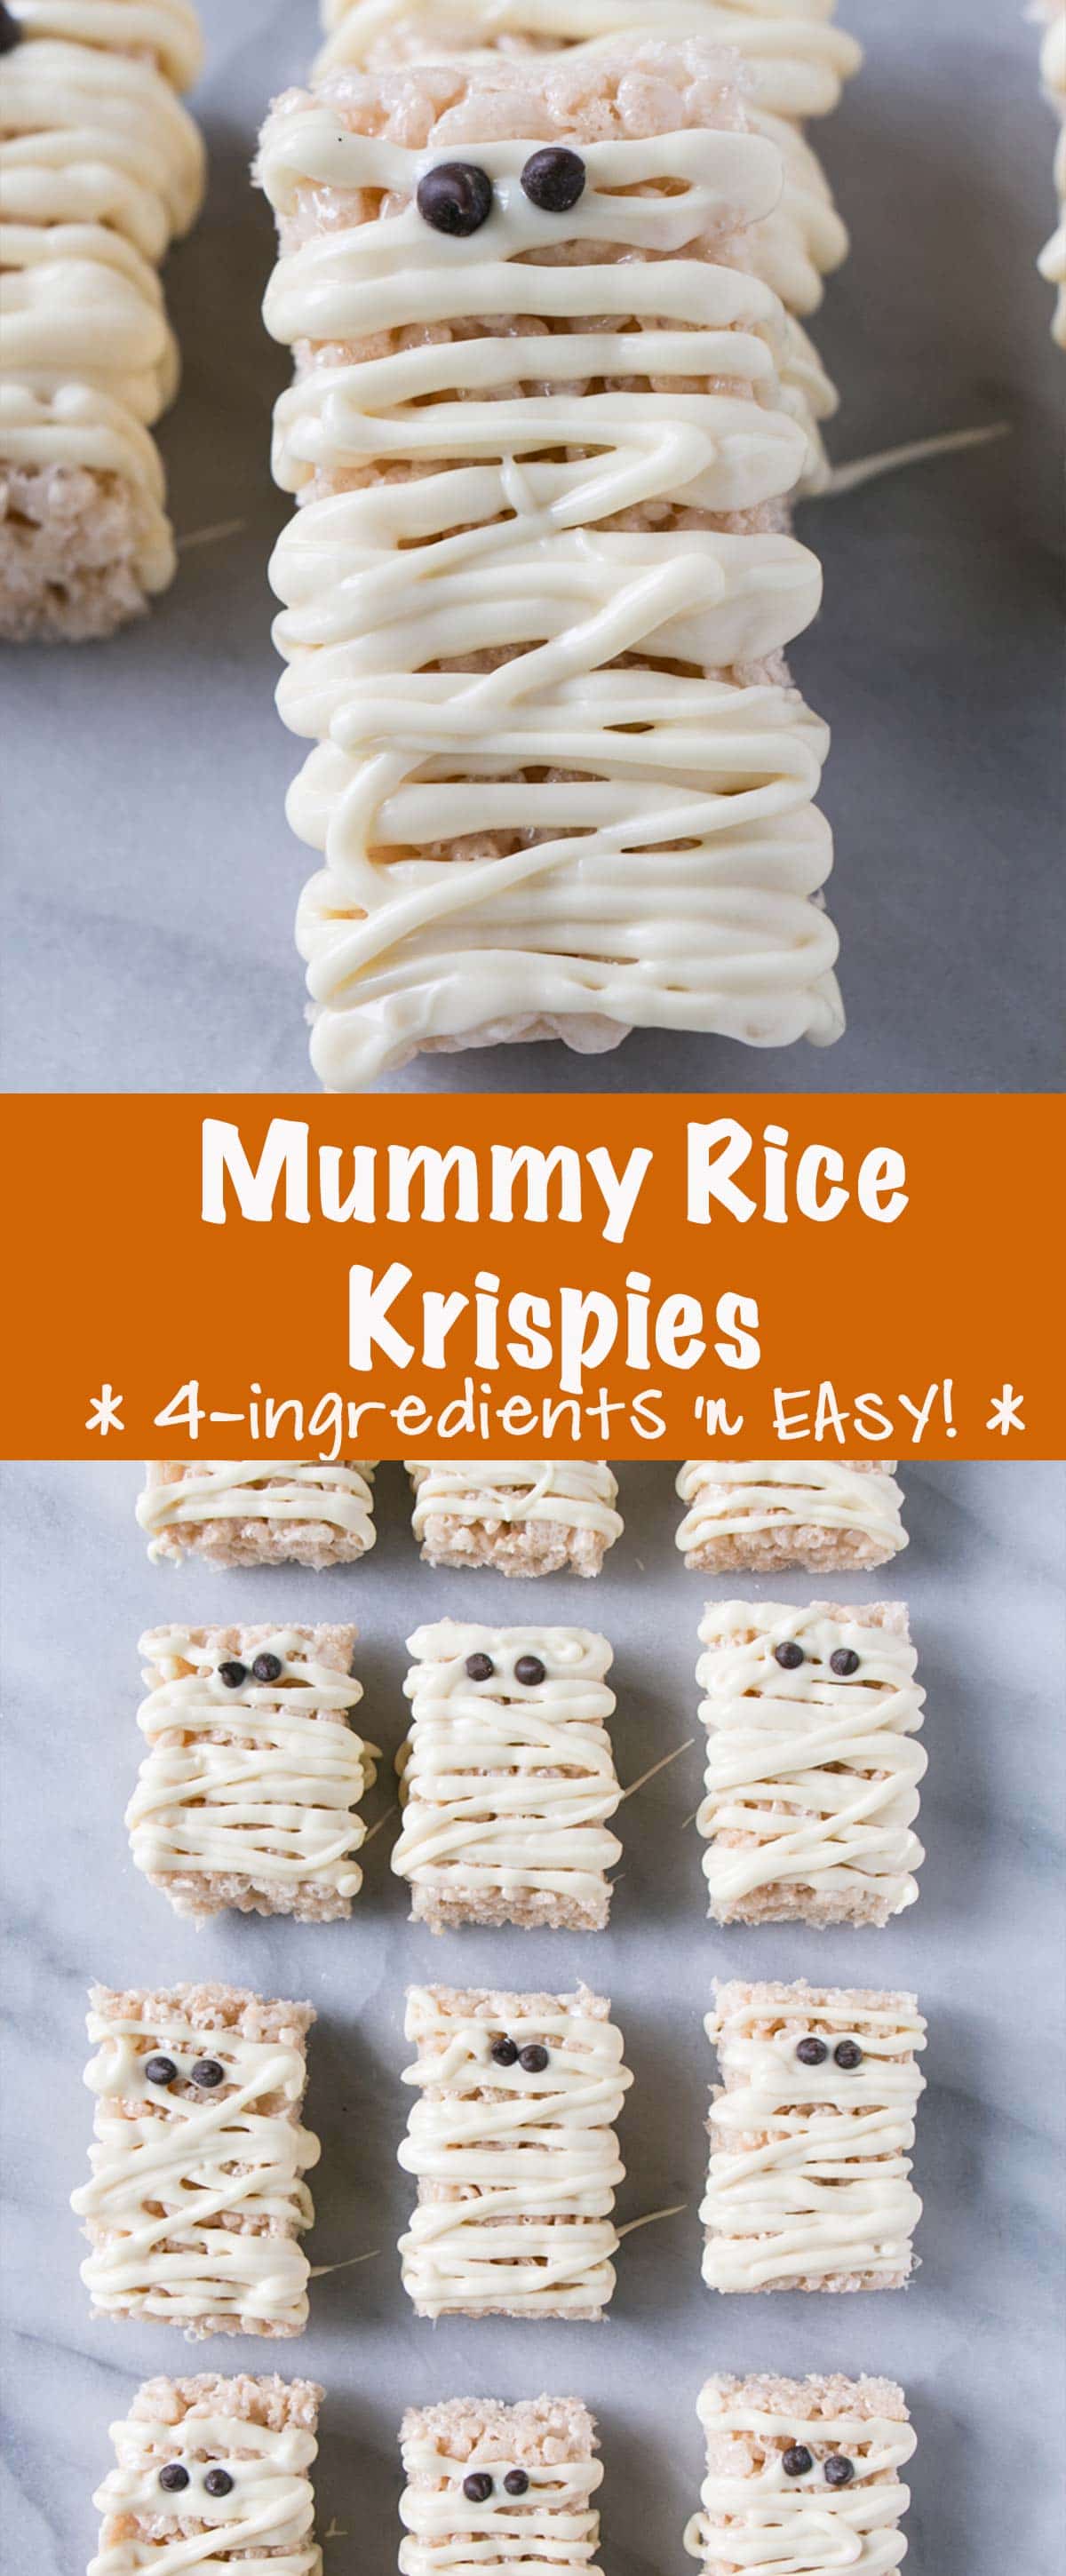 Mummy Rice Krispies Treats are an easy and quick Halloween recipe. Perfect for kids or school parties. via @mykitchenlove